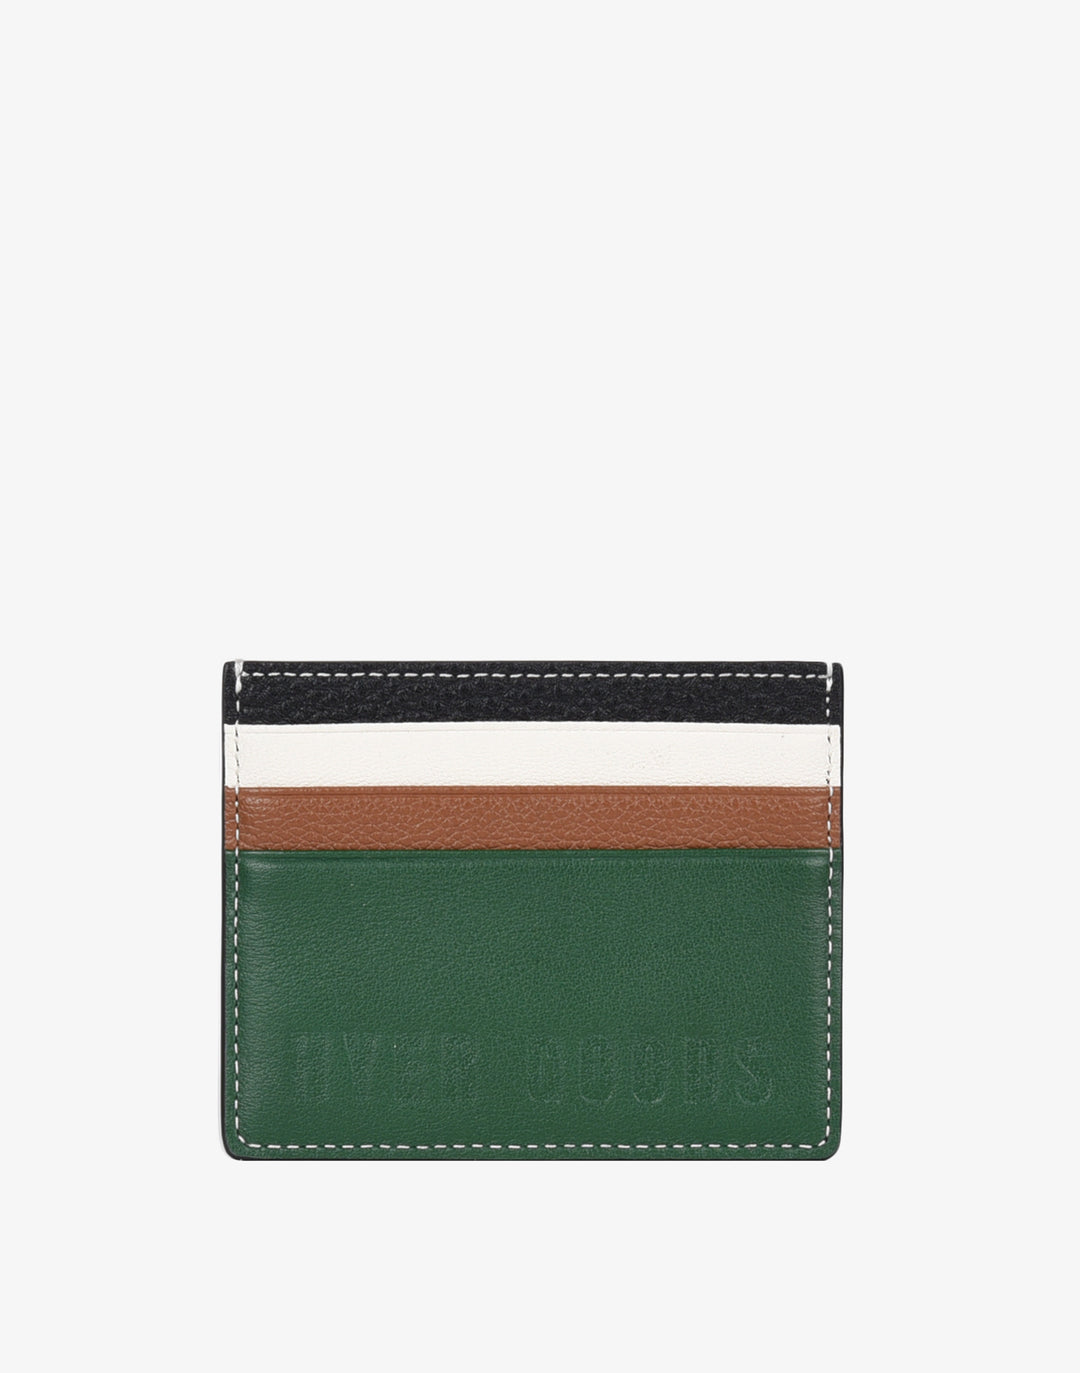 Hyer Goods_Card Wallet_Green Colorblock#color_green-colorblock